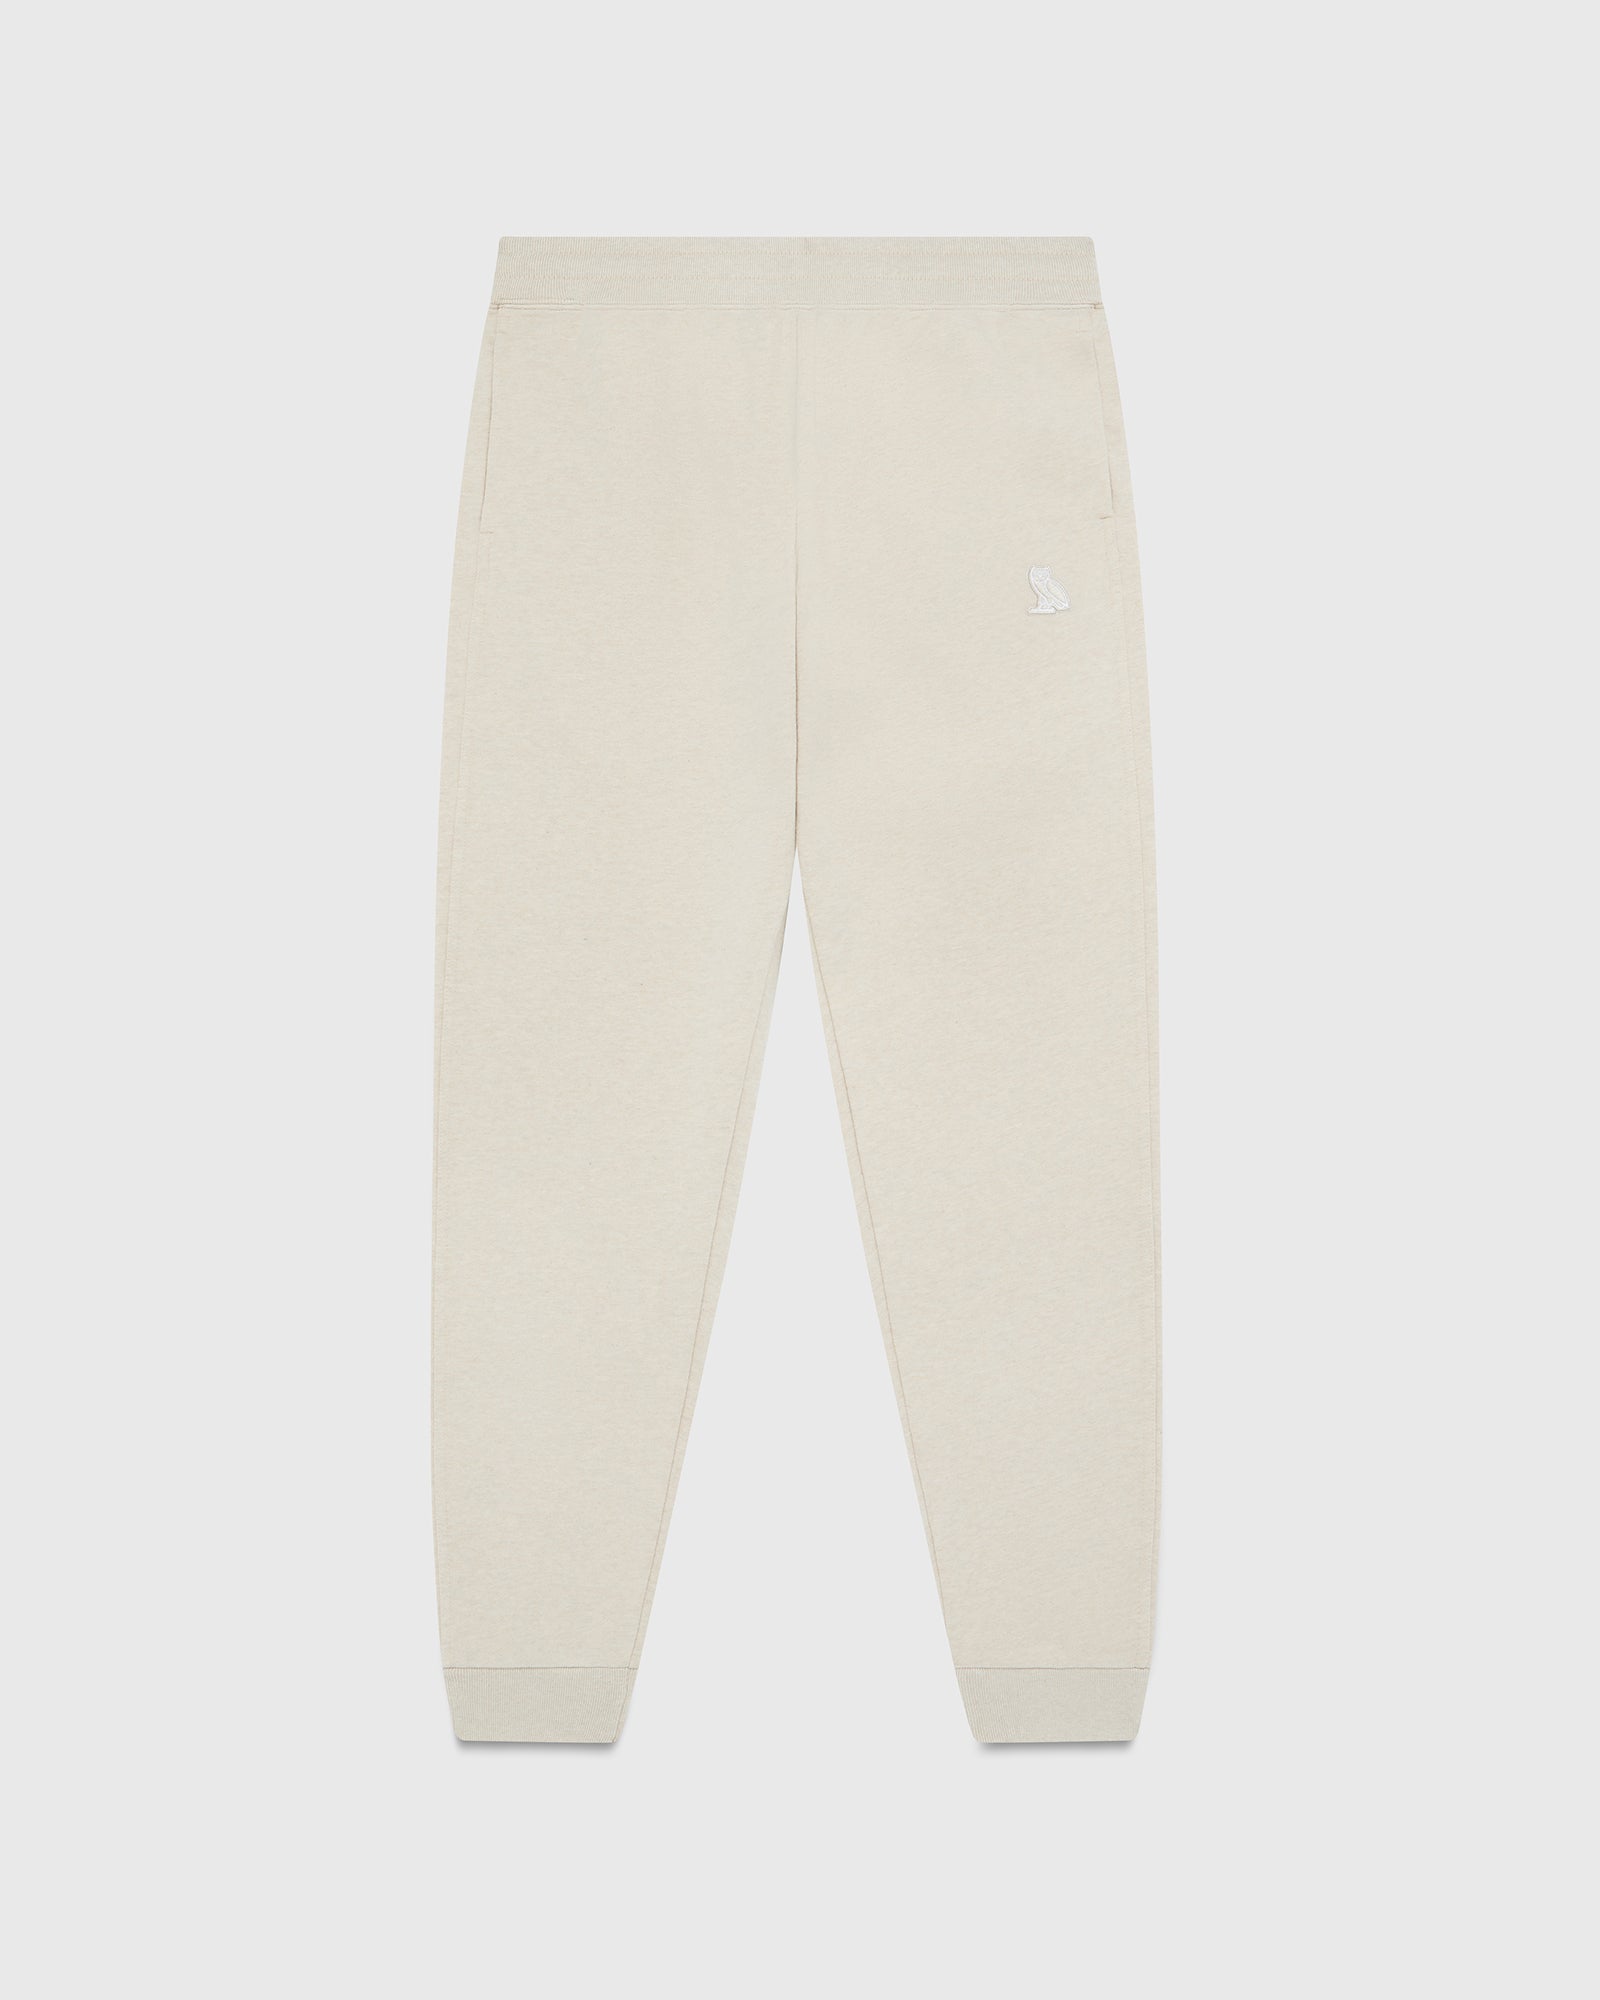 Classic Slim Fit Sweatpant - Oatmeal - October's Very Own